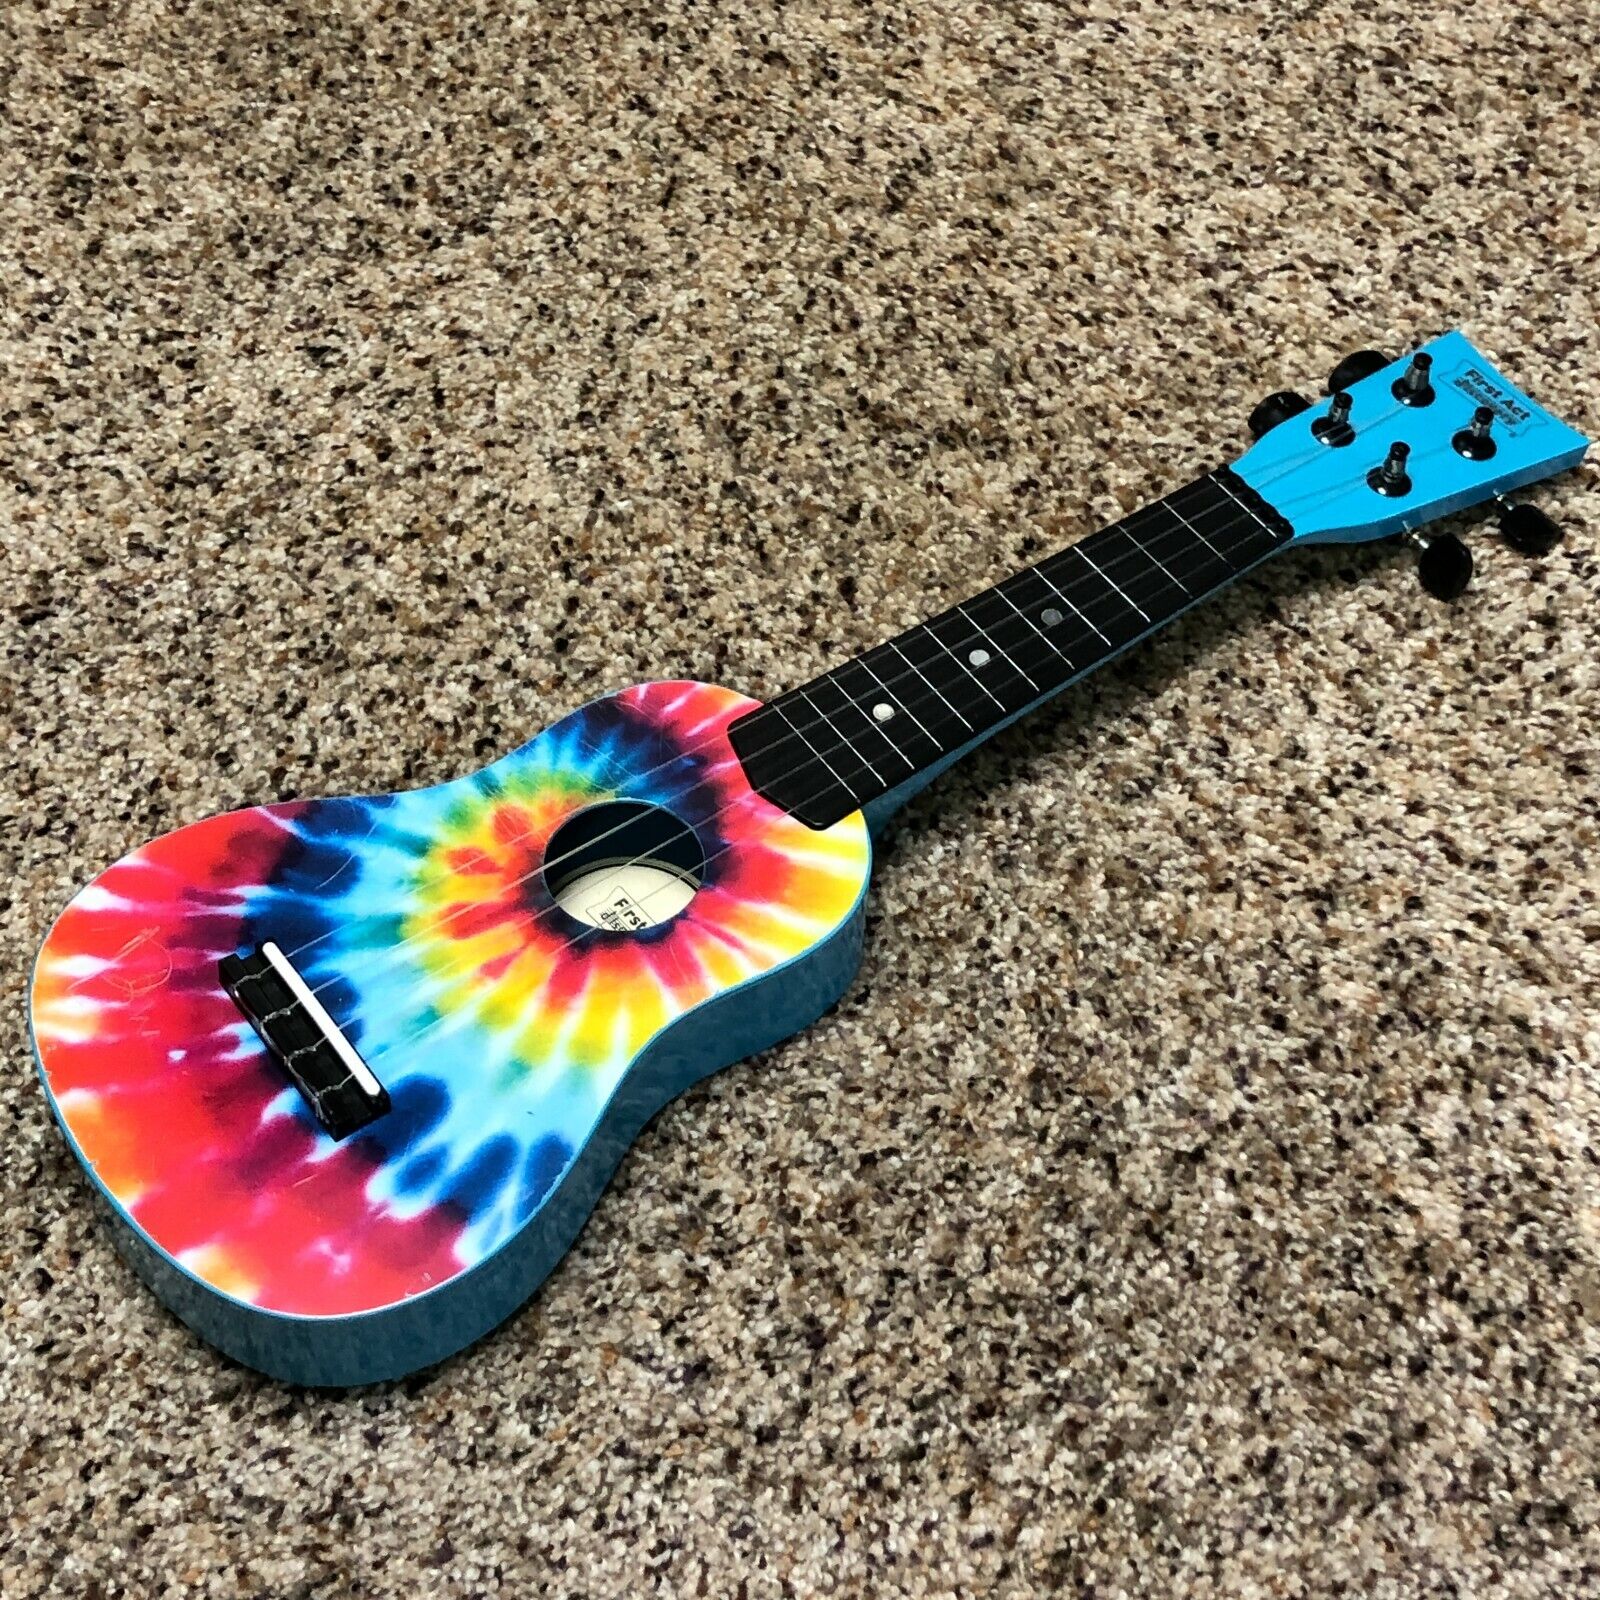 First Act Discovery tie dyed ukulele 2